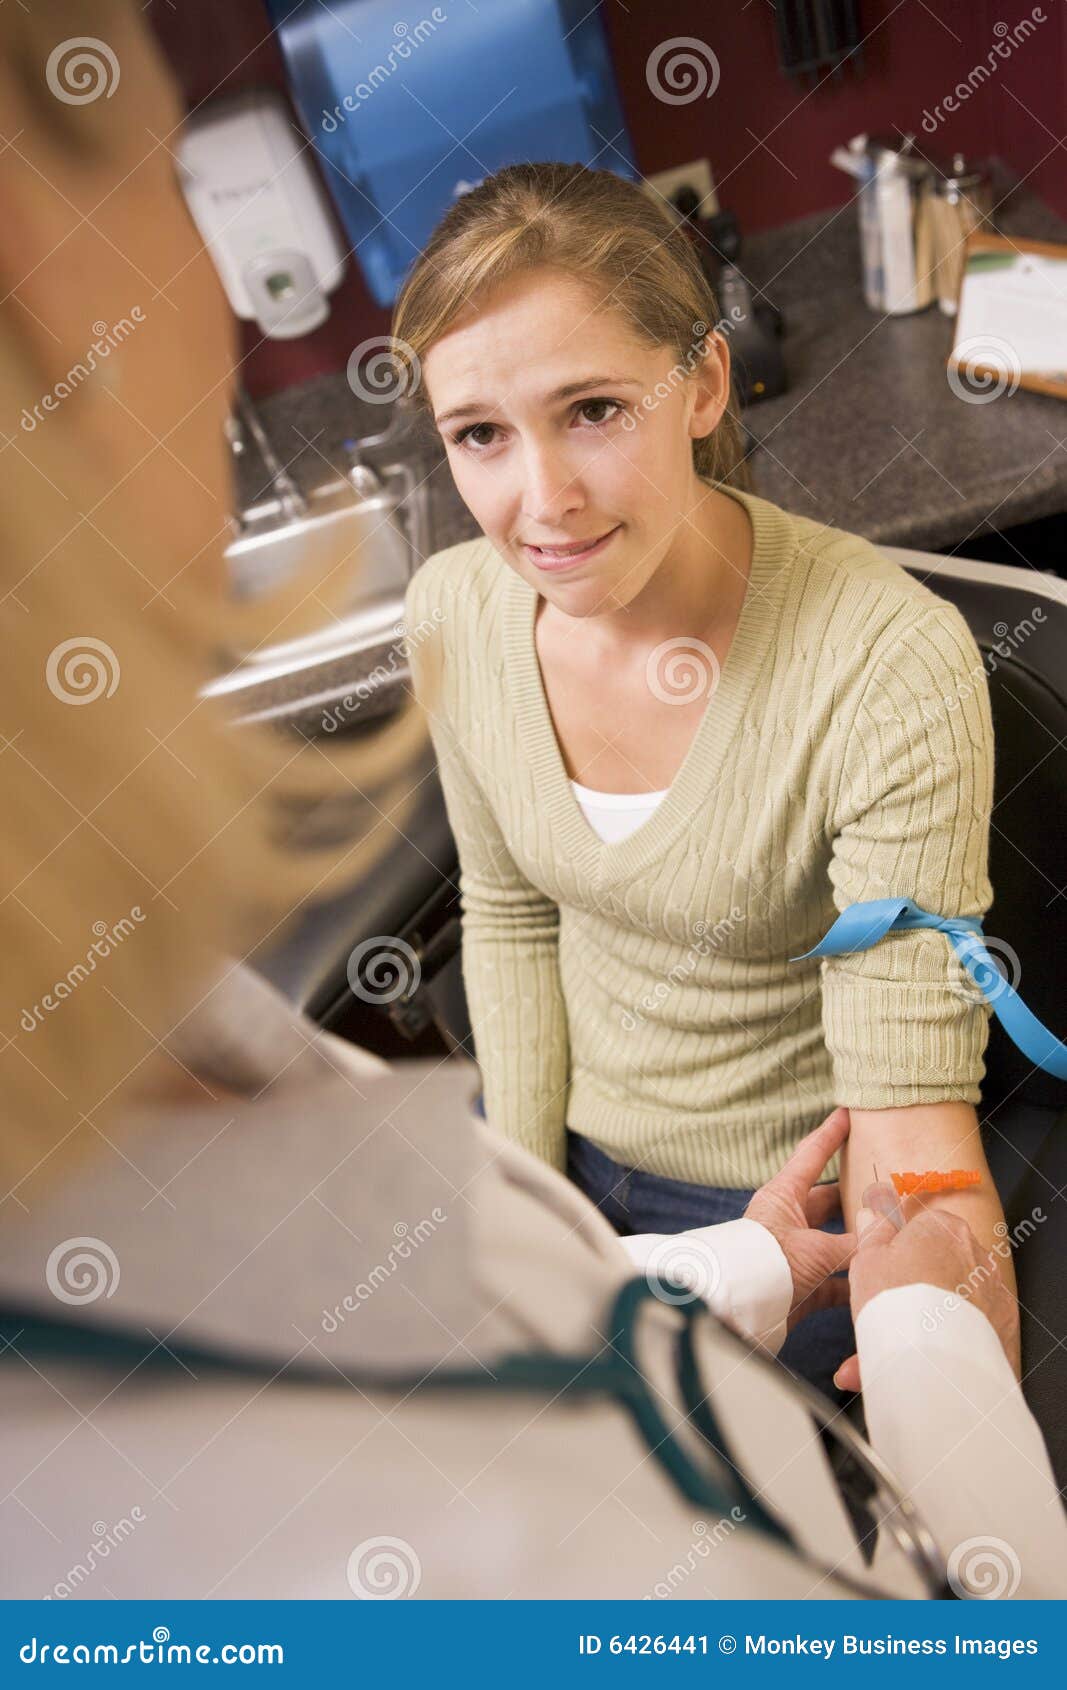 Young Woman Having Blood Test Done Stock Image  Image of needle